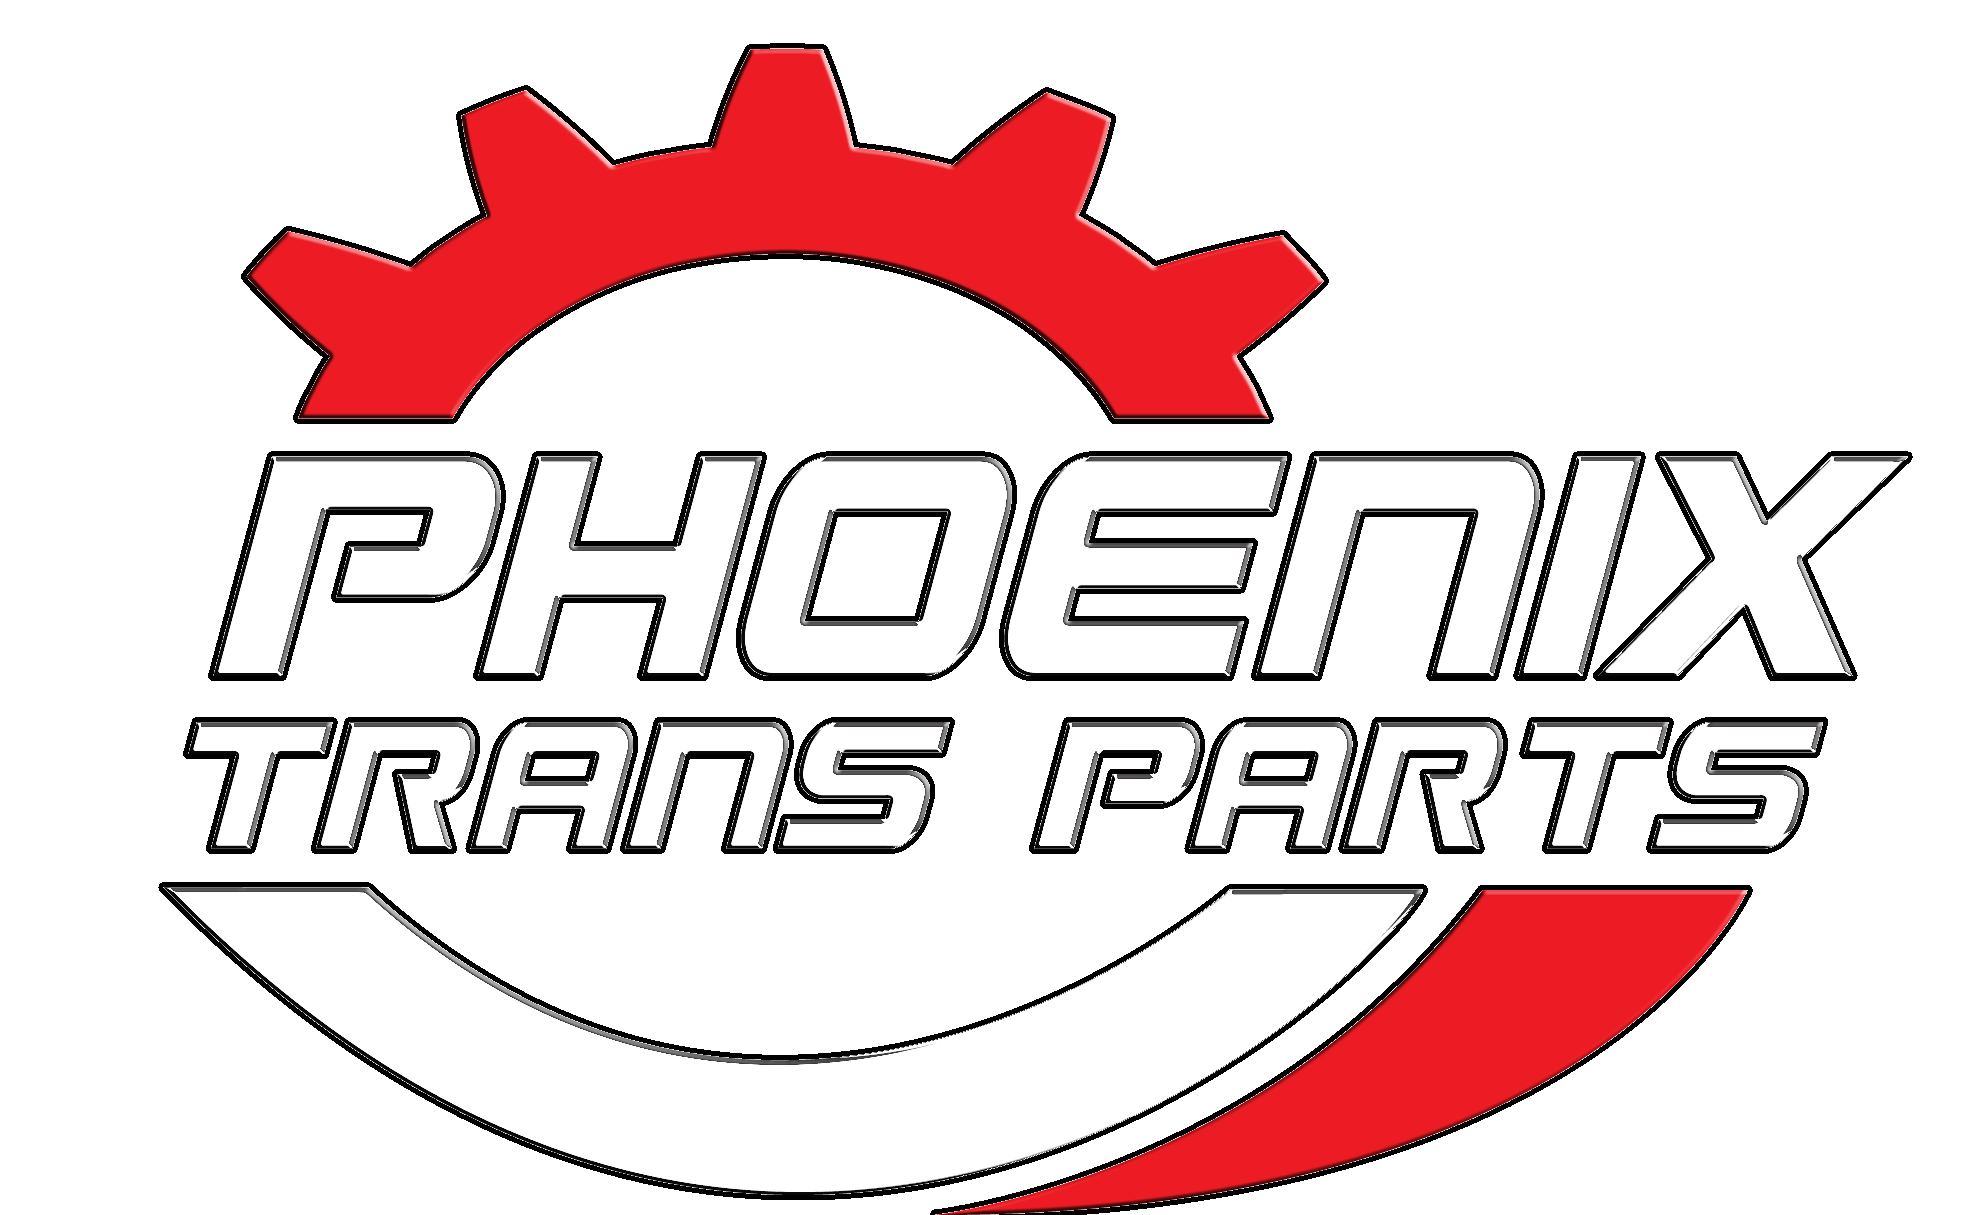 Phoenix Transmission Parts has Sonnax, Exedy, Raybestos and Alto transmission parts for all types of auto vehicles. Local and global. We have torque converters, rebuild kits, 4L60E parts, 700R4 parts, Chevy, Ford, Chrysler, Jeep and much more